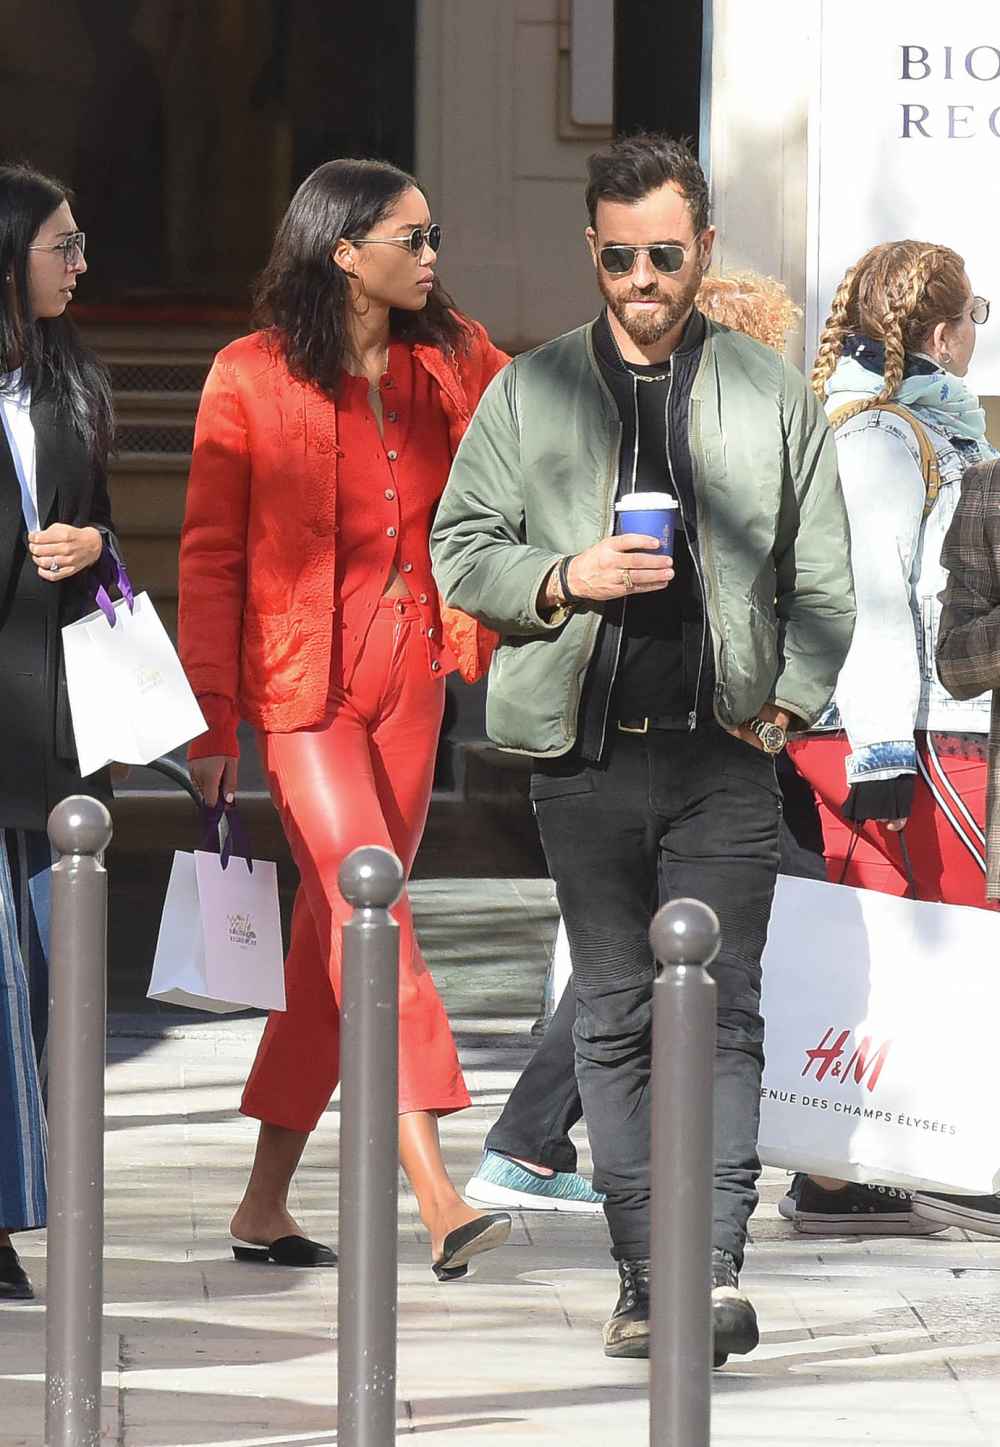 justin theroux spotted out with laura harrier following split from jennifer aniston